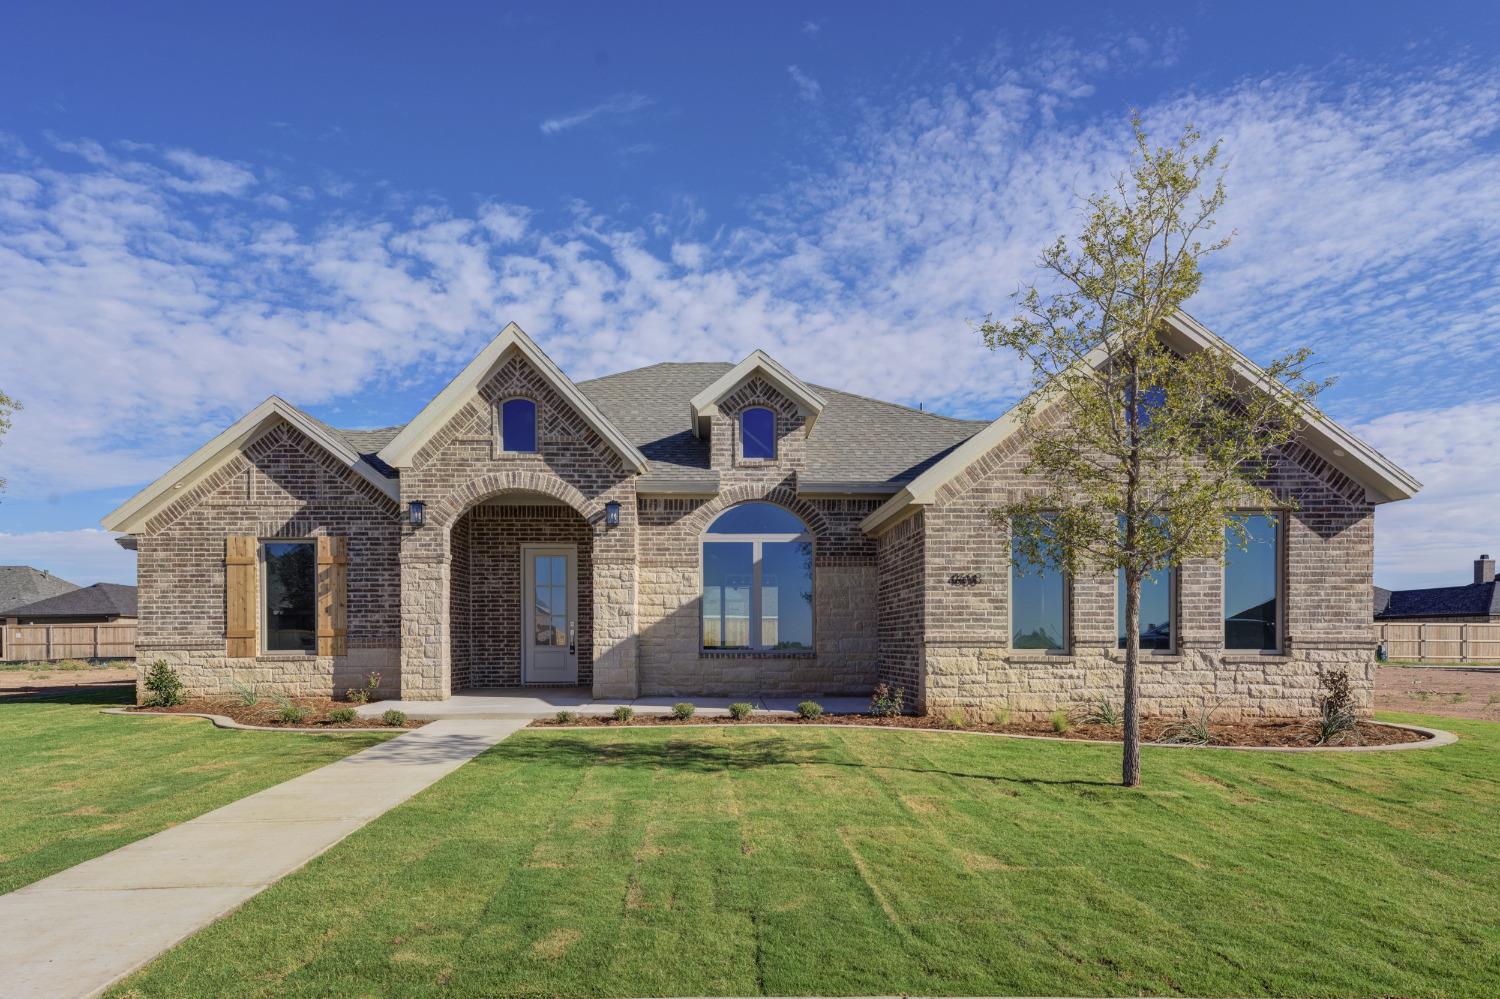 Great new construction 4/3 with 3 CAR GARAGE in Stratford Pointe. This is one you won't want to miss! Great open concept plan with tons of windows providing excellent natural lighting to the main living area. All guest rooms are very large with big walk in closets. Master suite is isolated with vaulted ceiling, free standing tub, large separate shower and walk in closet. Large covered back patio and spacious yard is perfect for entertaining. Right around the corner from the park and pond. Call Landon today for your private tour. 806-786-8703